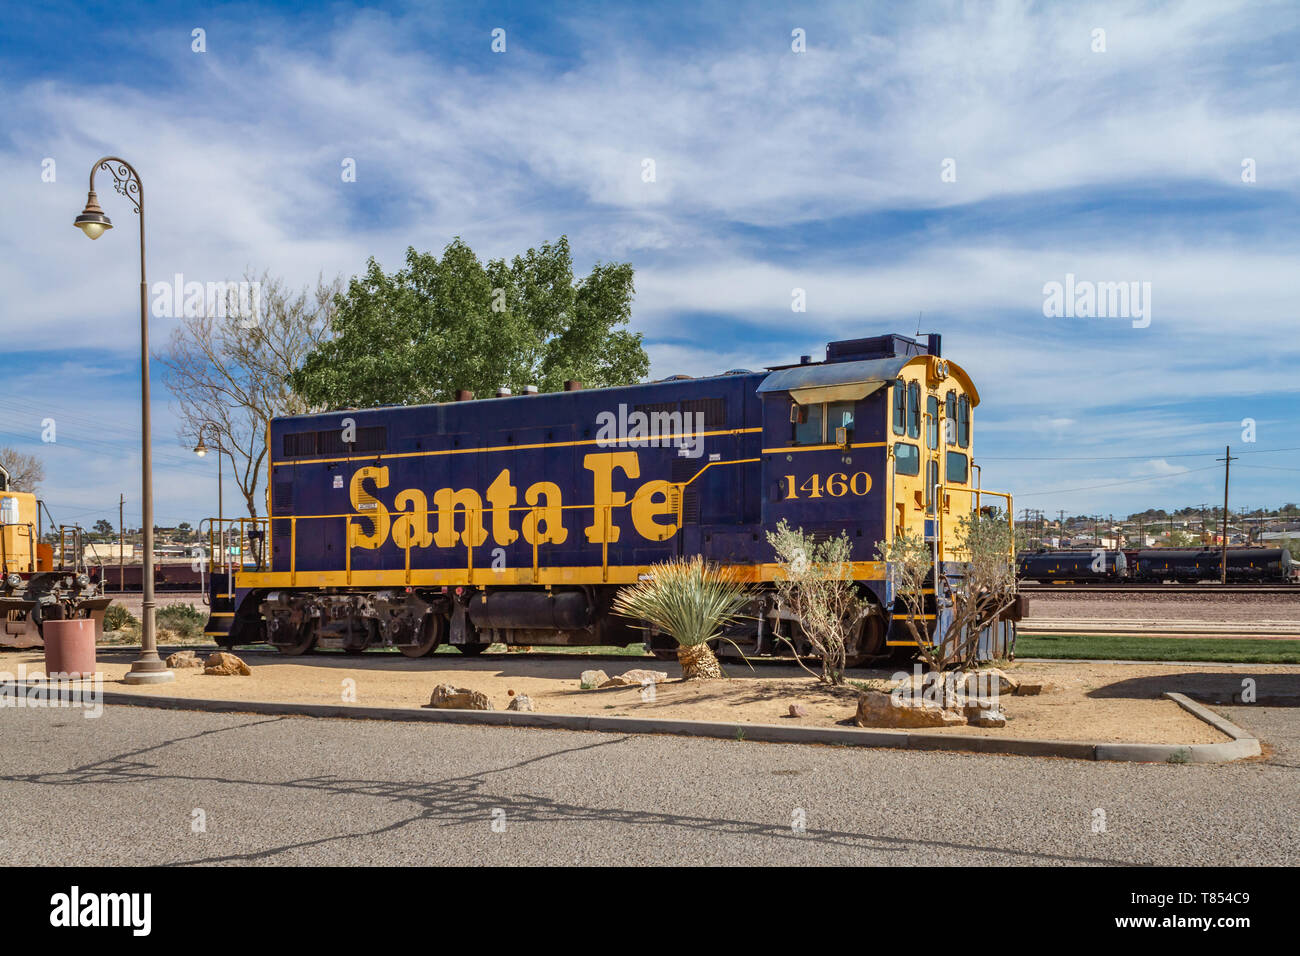 Barstow, CA / USA – April 14, 2019: Santa Fe railroad engine number 1460 at the Western America Railroad Museum located at the Barstow Harvey House at Stock Photo